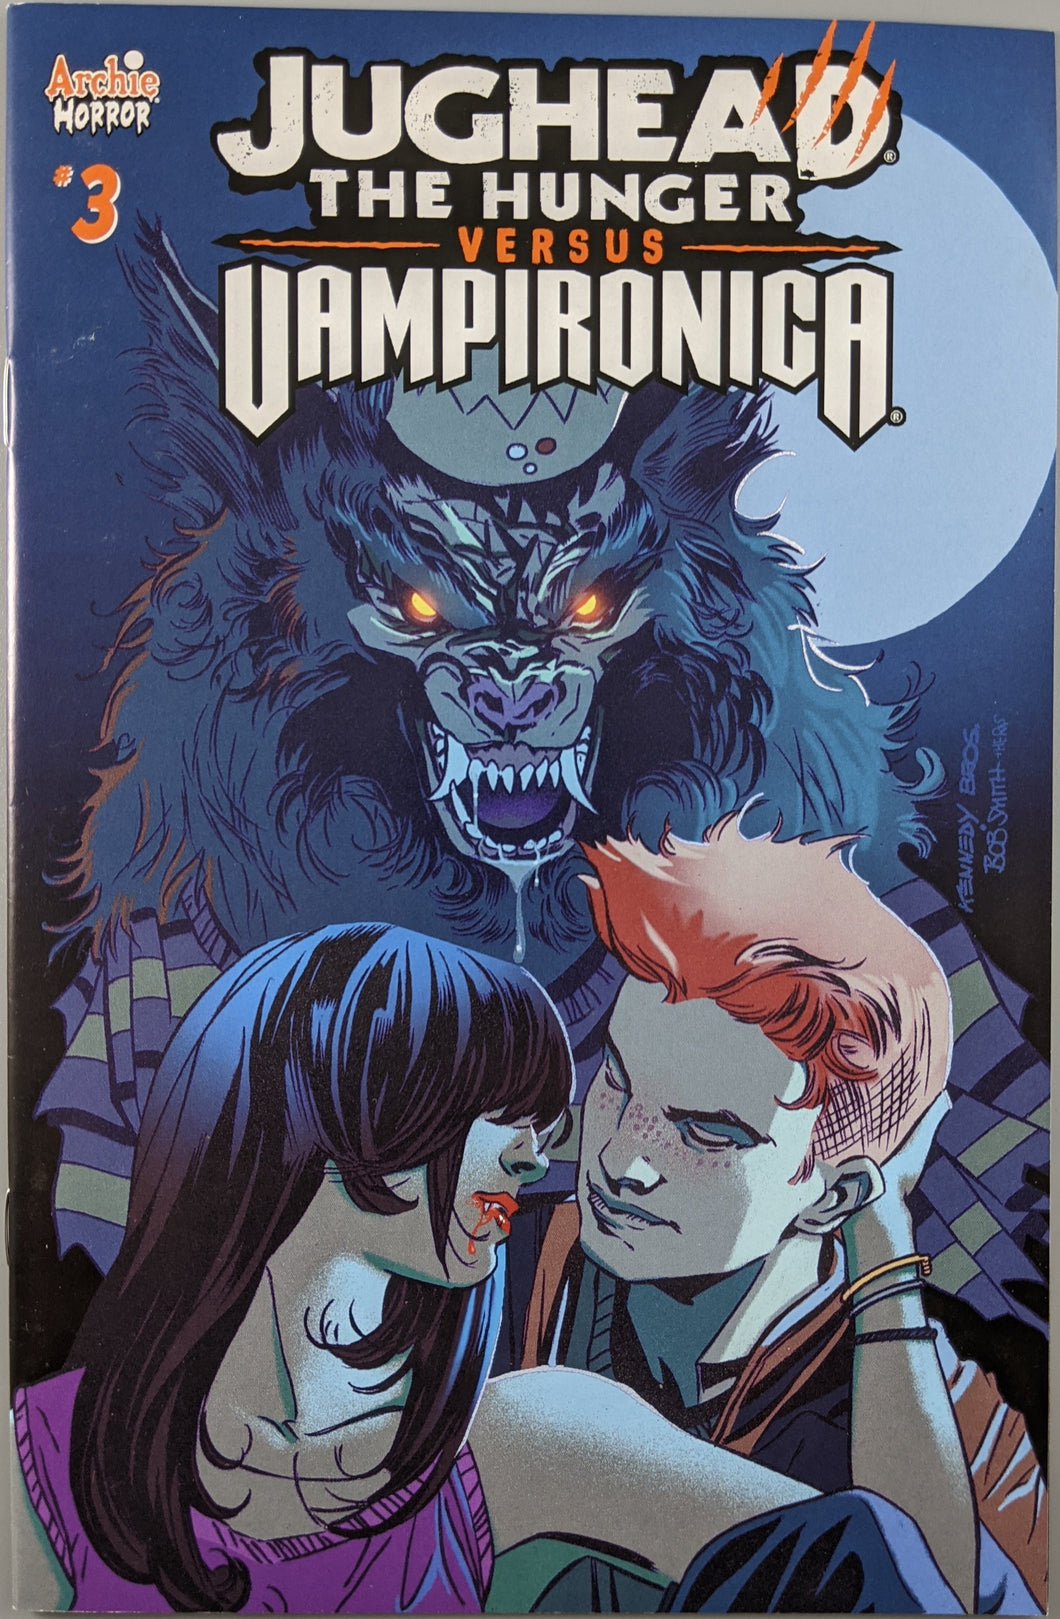 Jughead The Hunger VS Vampironica (2019) #3 Cover A (Kennedy)